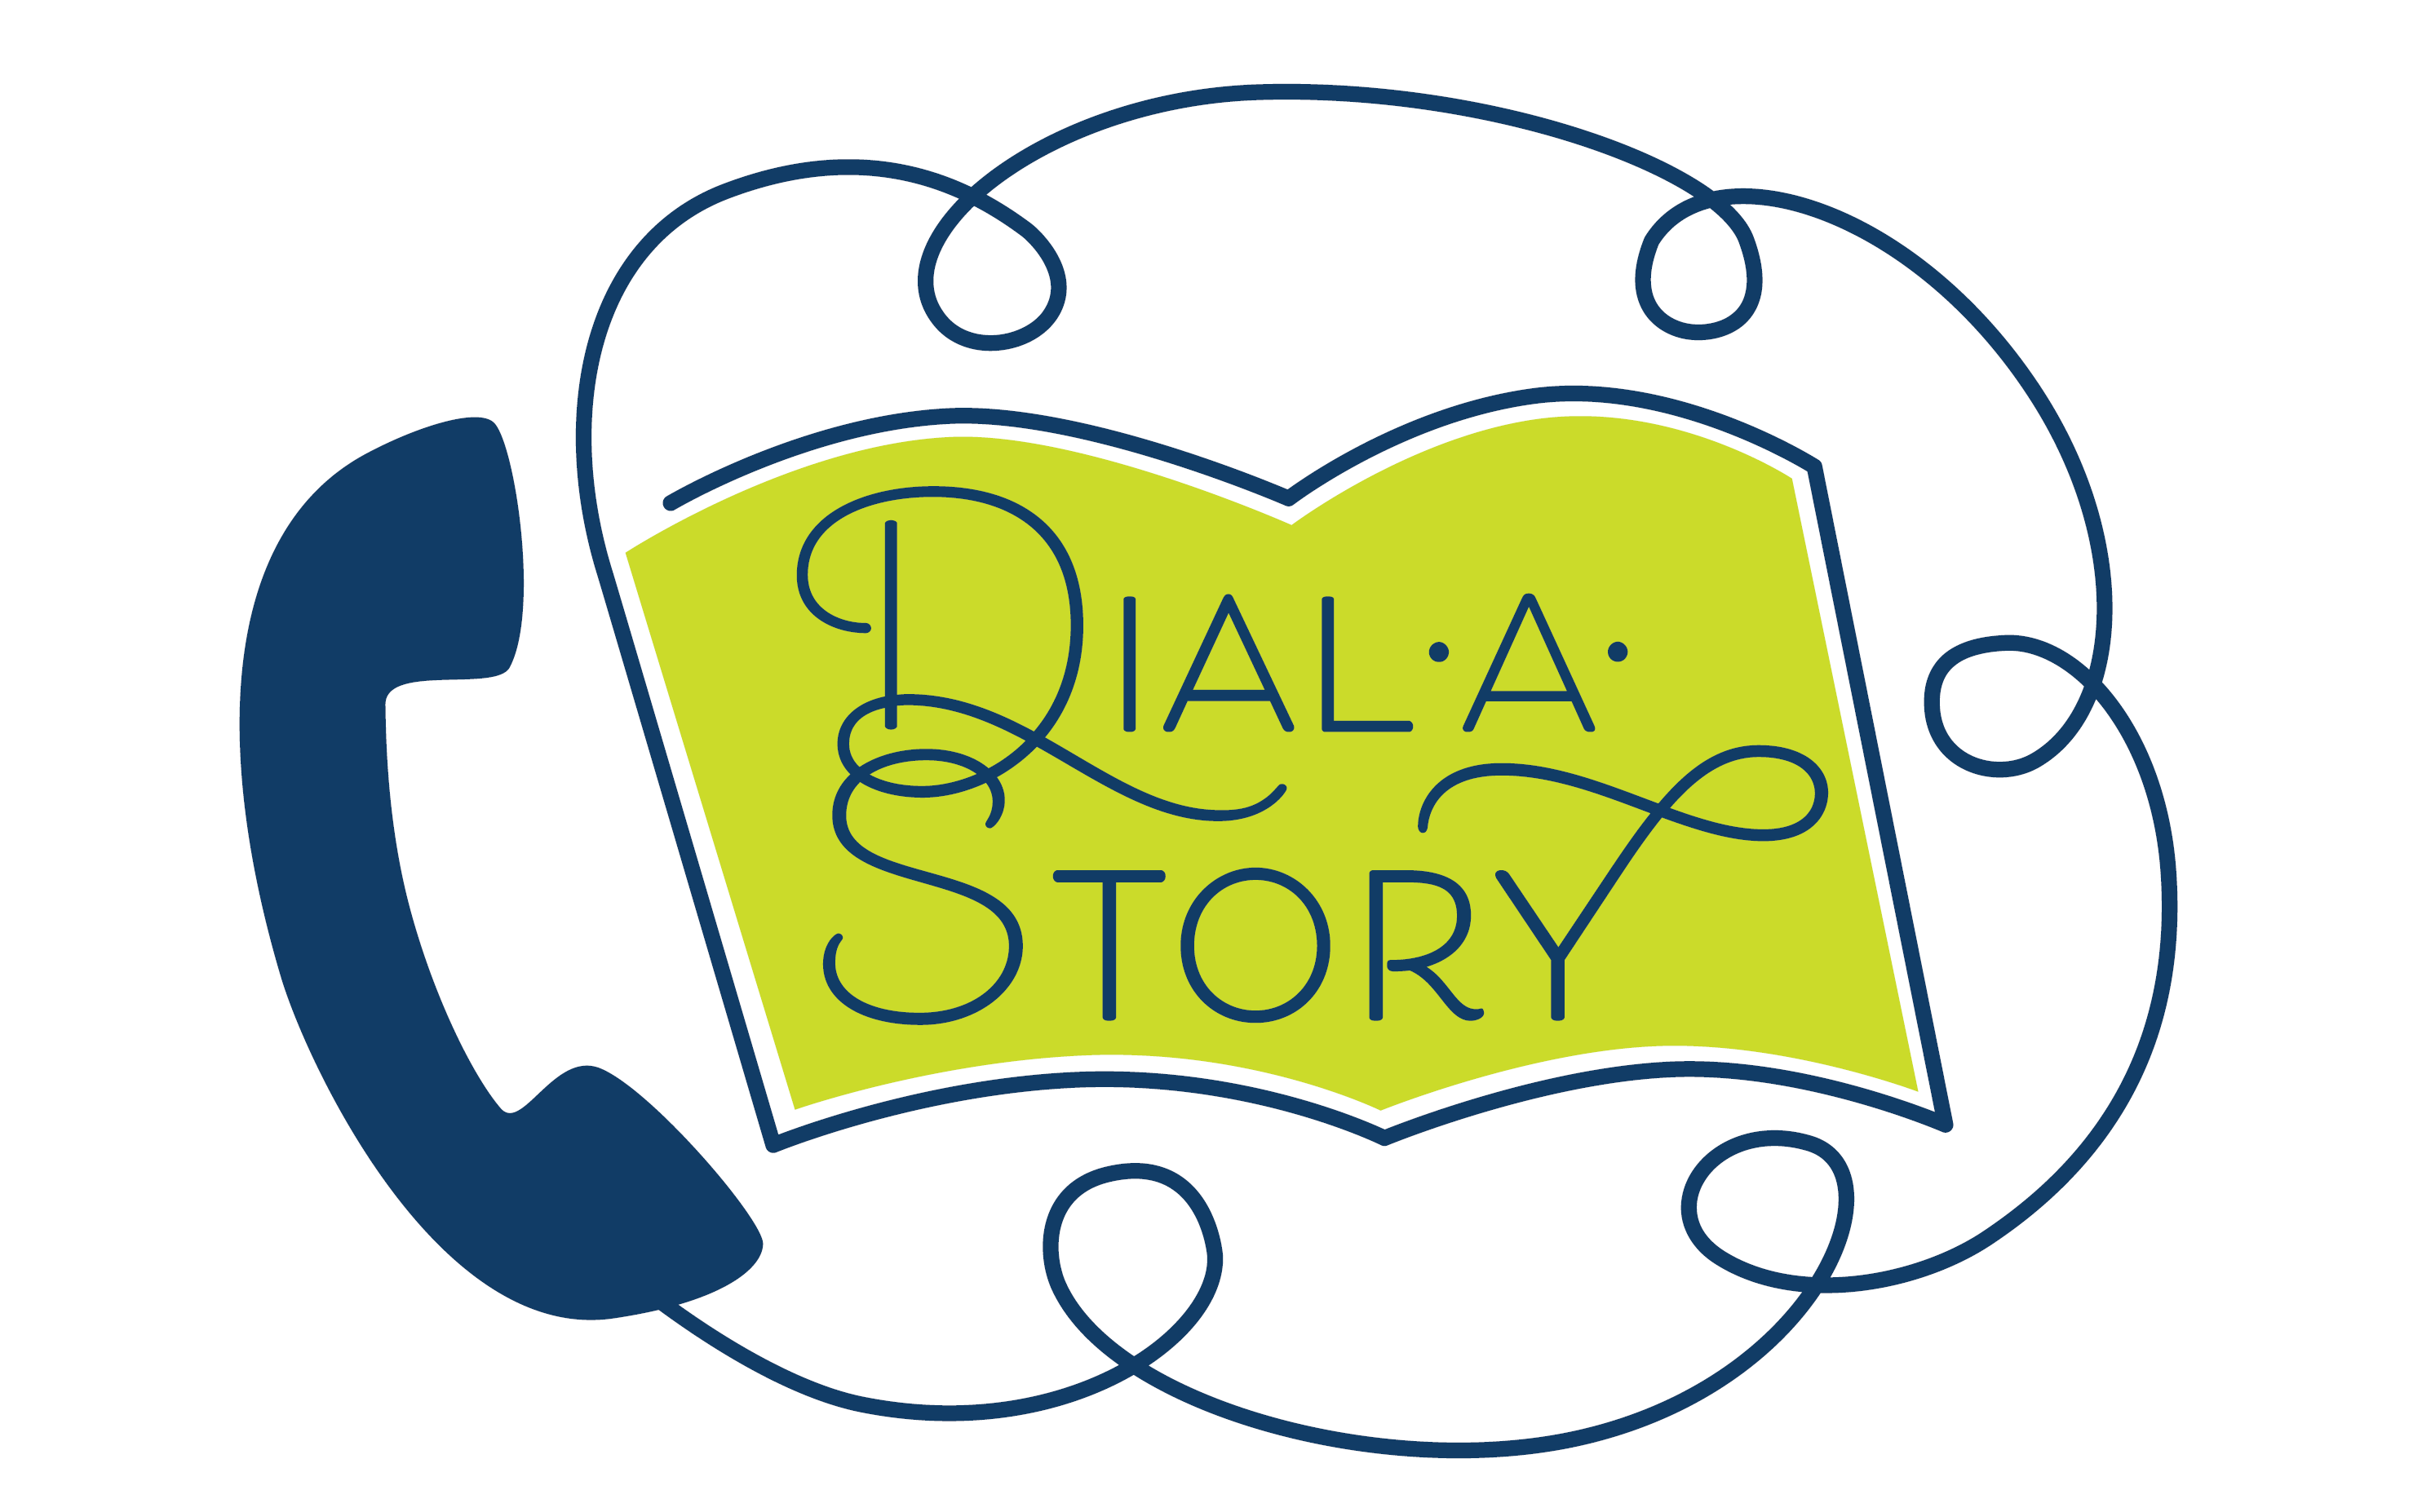 Dial-a-story